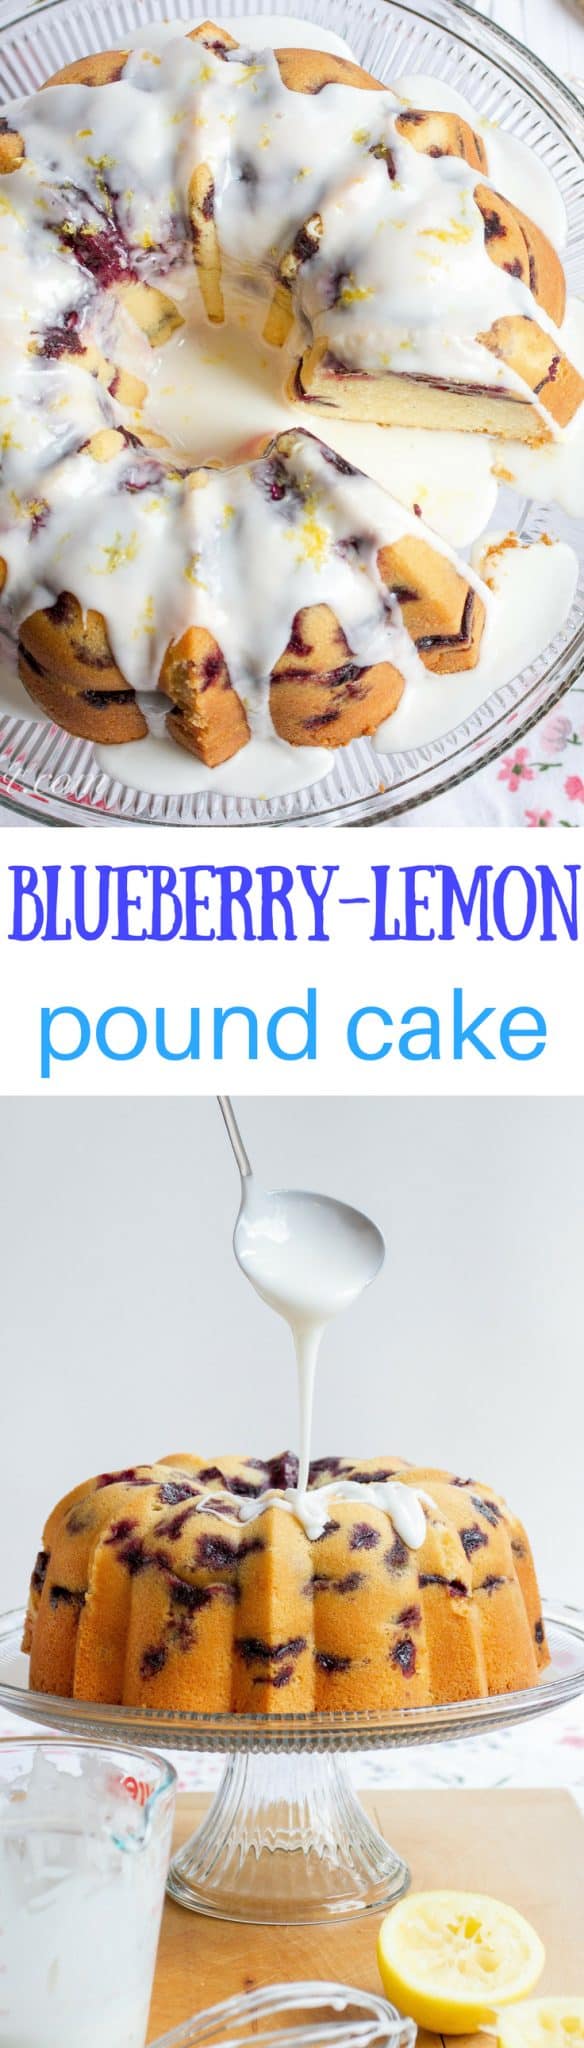 Blueberry Lemon Pound Cake - A deliciously moist classic pound cake stuffed full of ripe, juicy blueberries then drizzled with a simple lemon icing. www.savingdessert.com